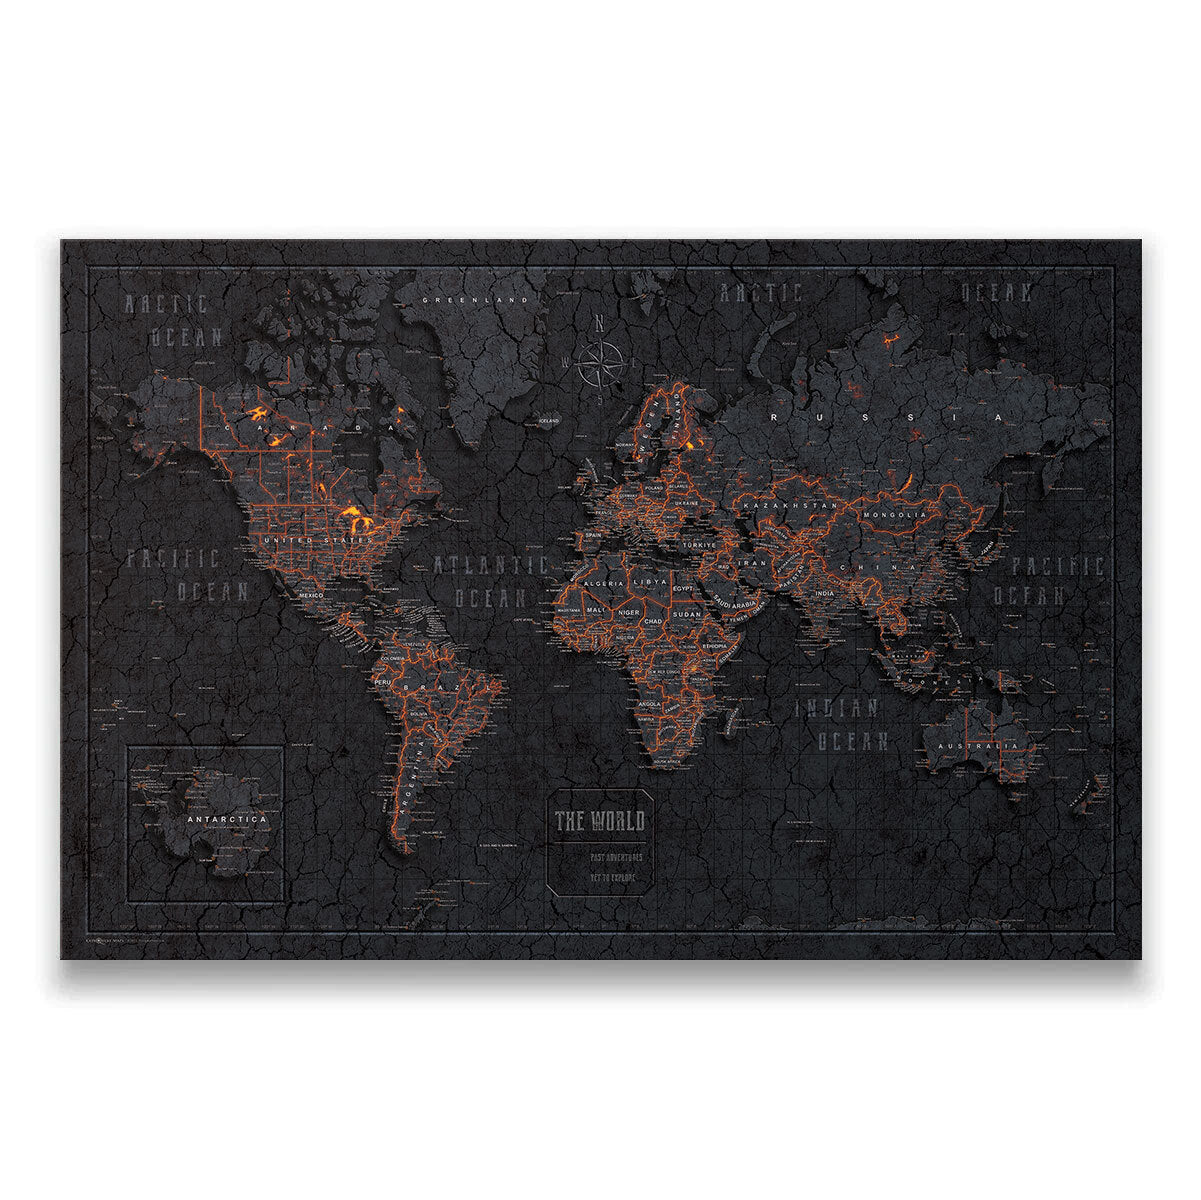 Mercator Projection Poster Maps